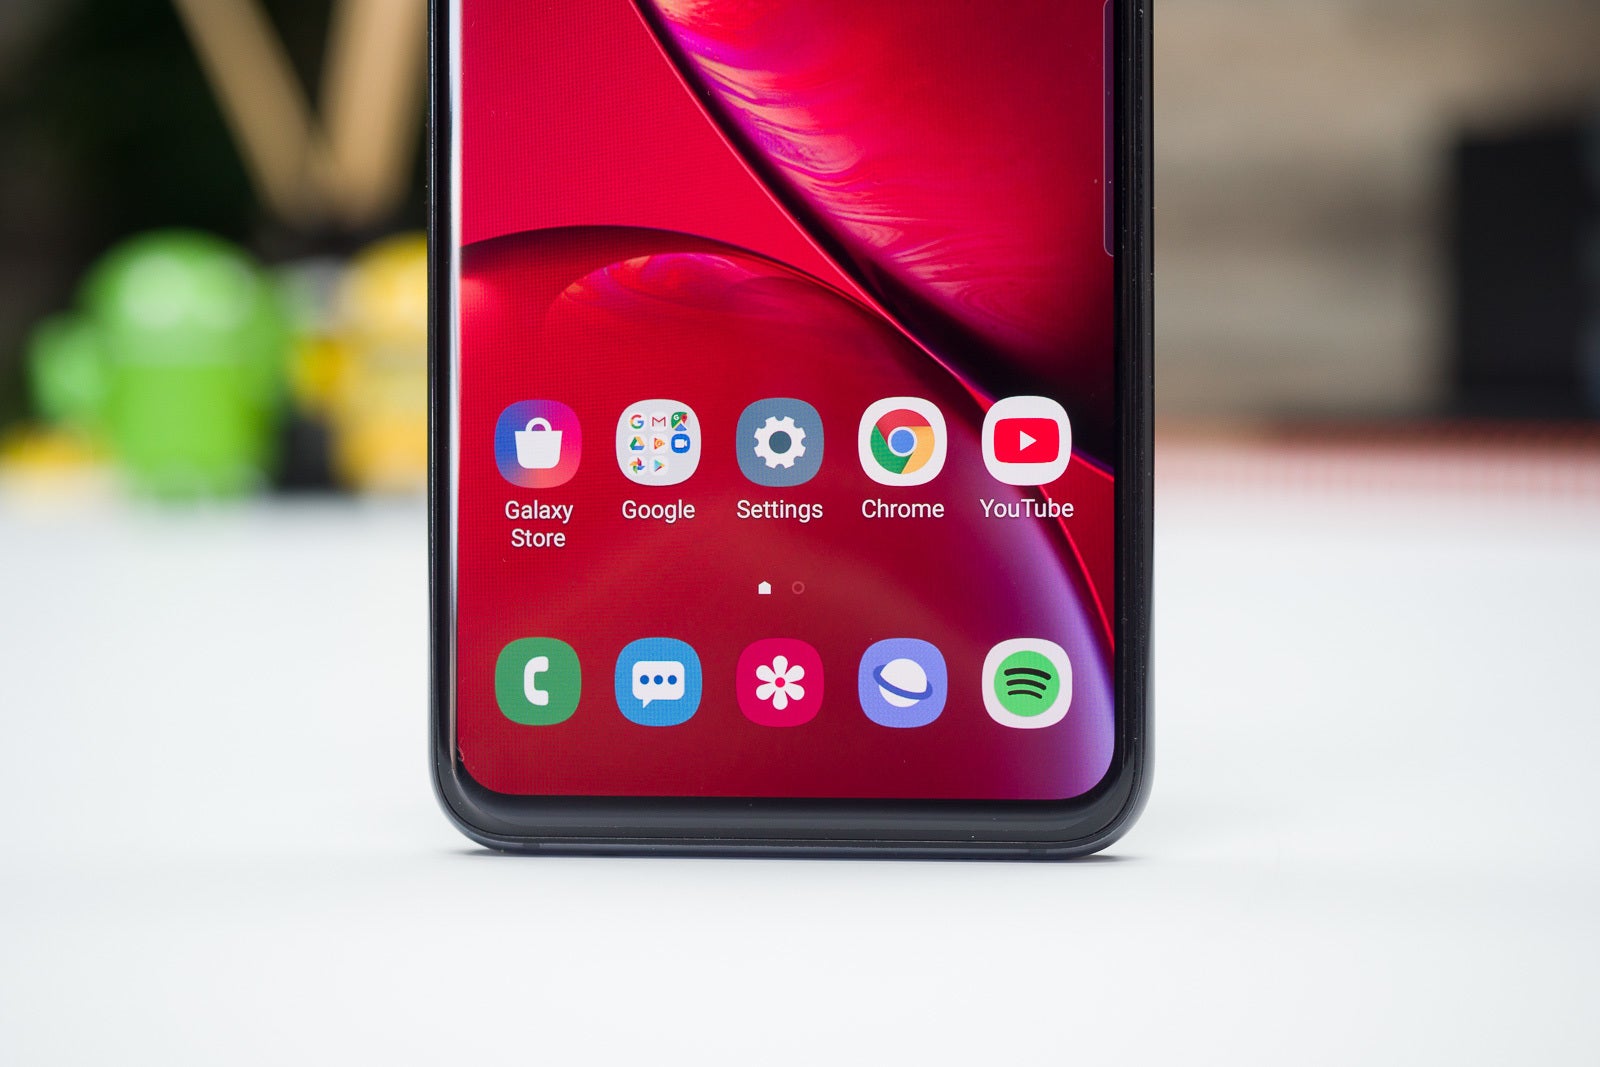 Samsung Galaxy S10e - Latest Galaxy A90 leak points towards one disappointment, different name